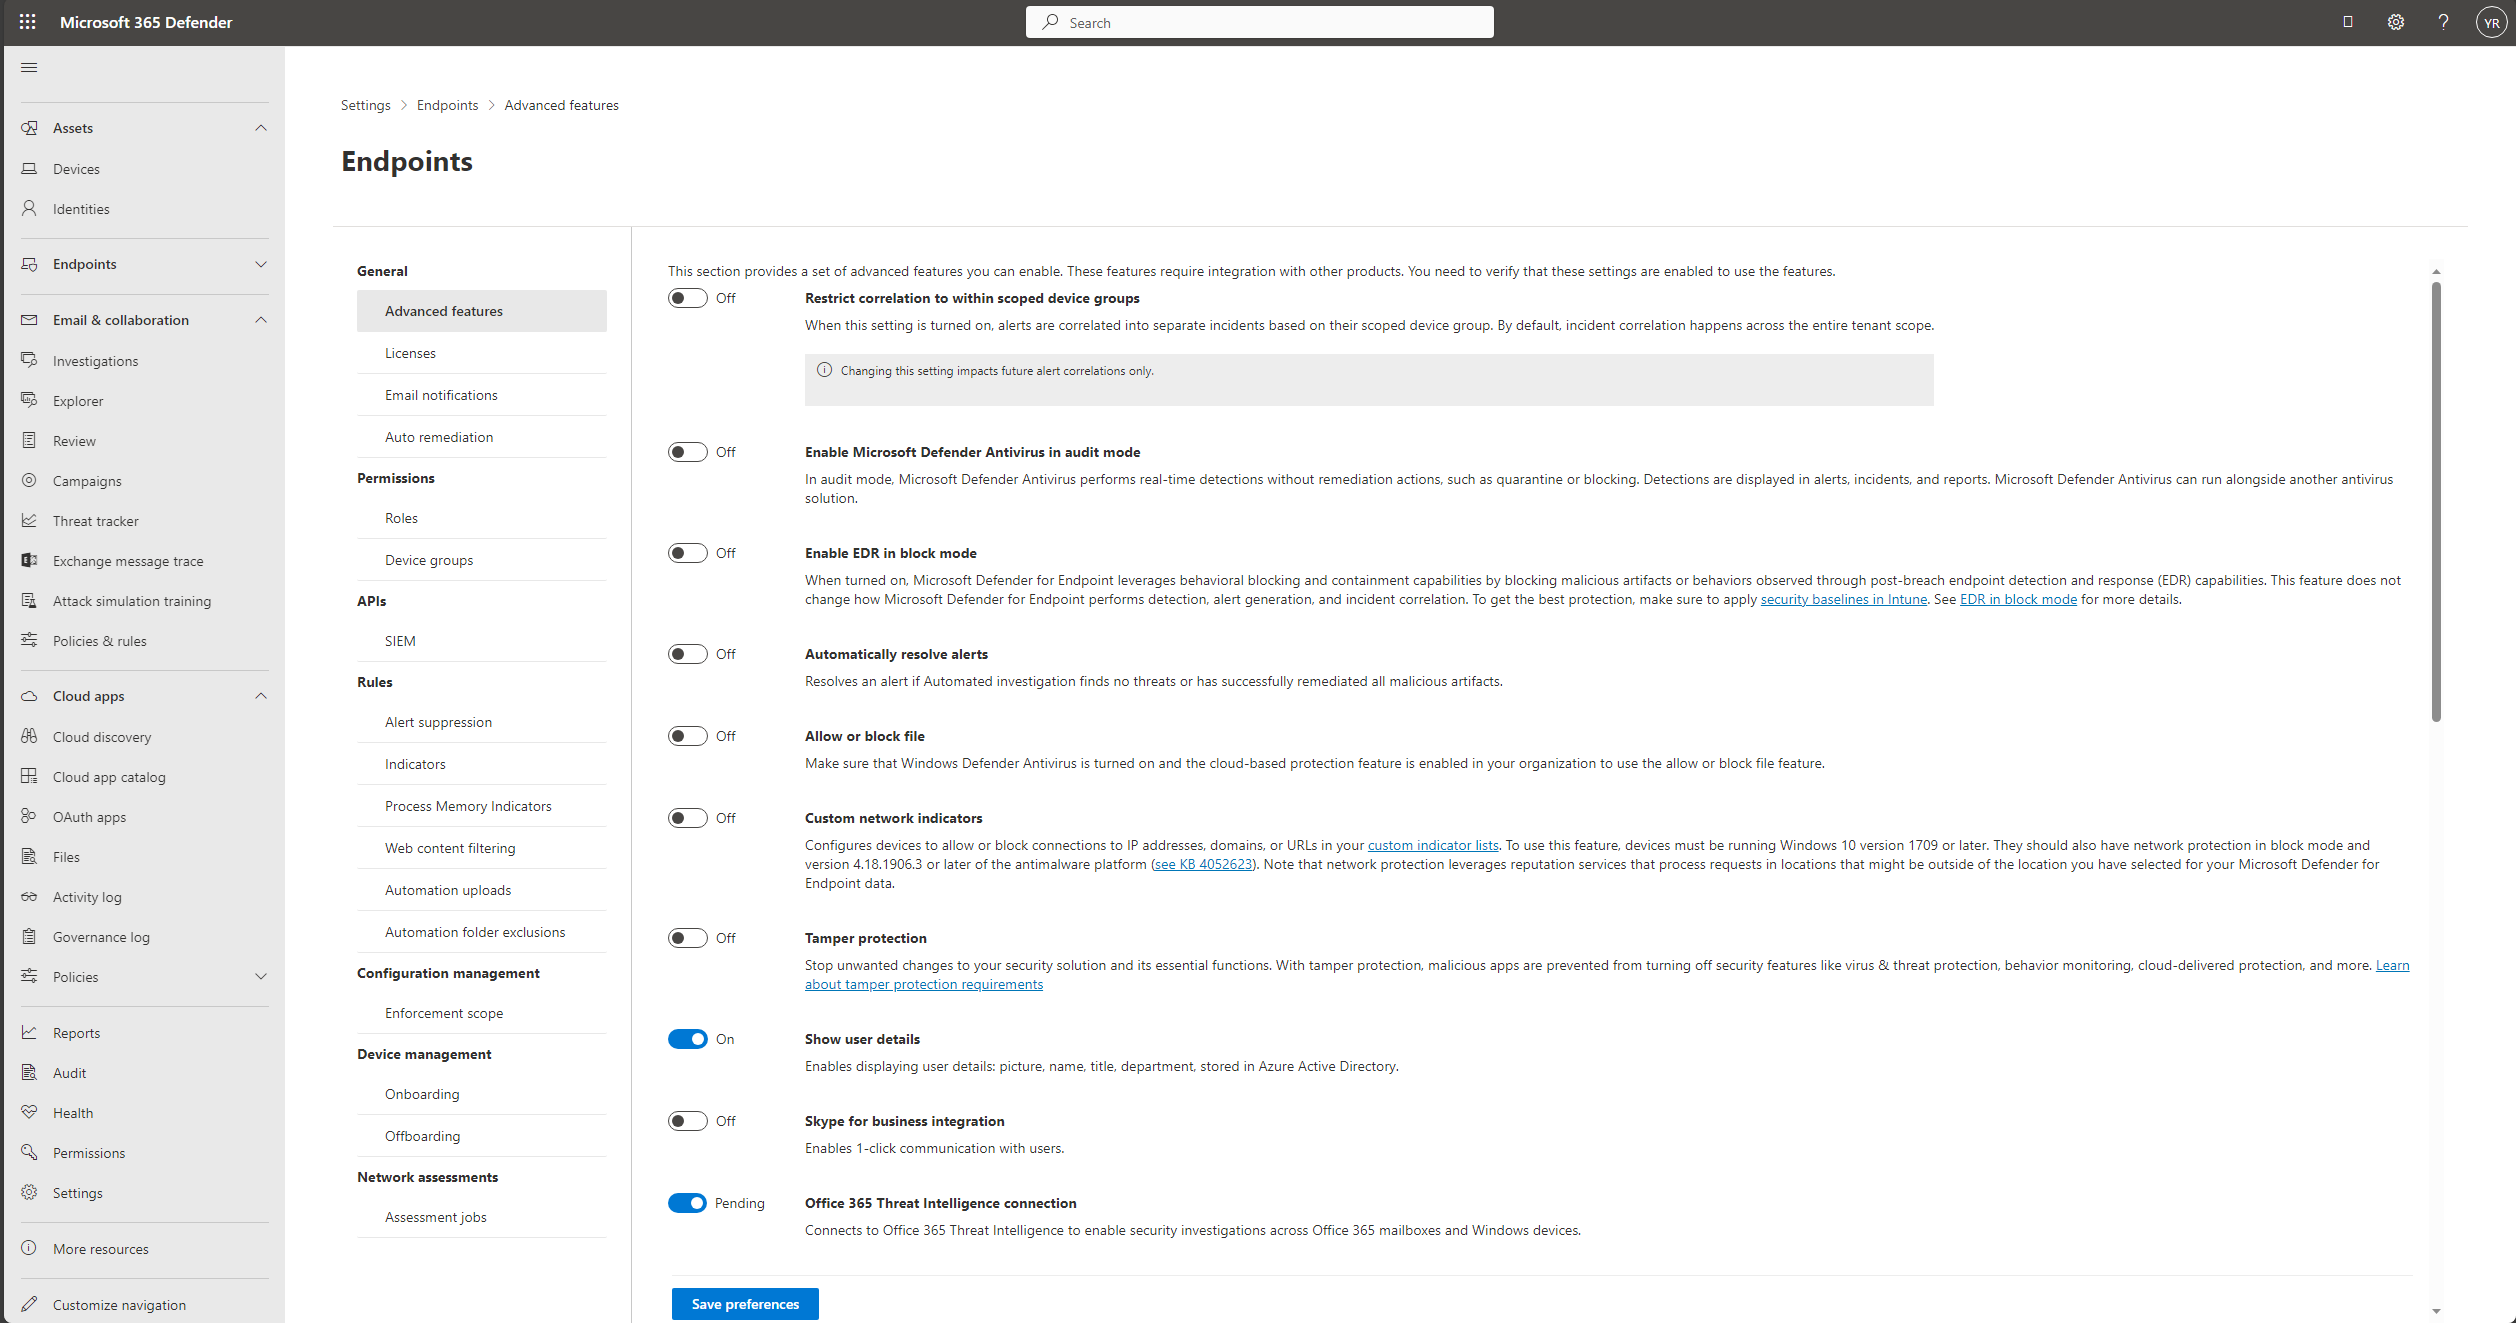 Screenshot of the Endpoints page.